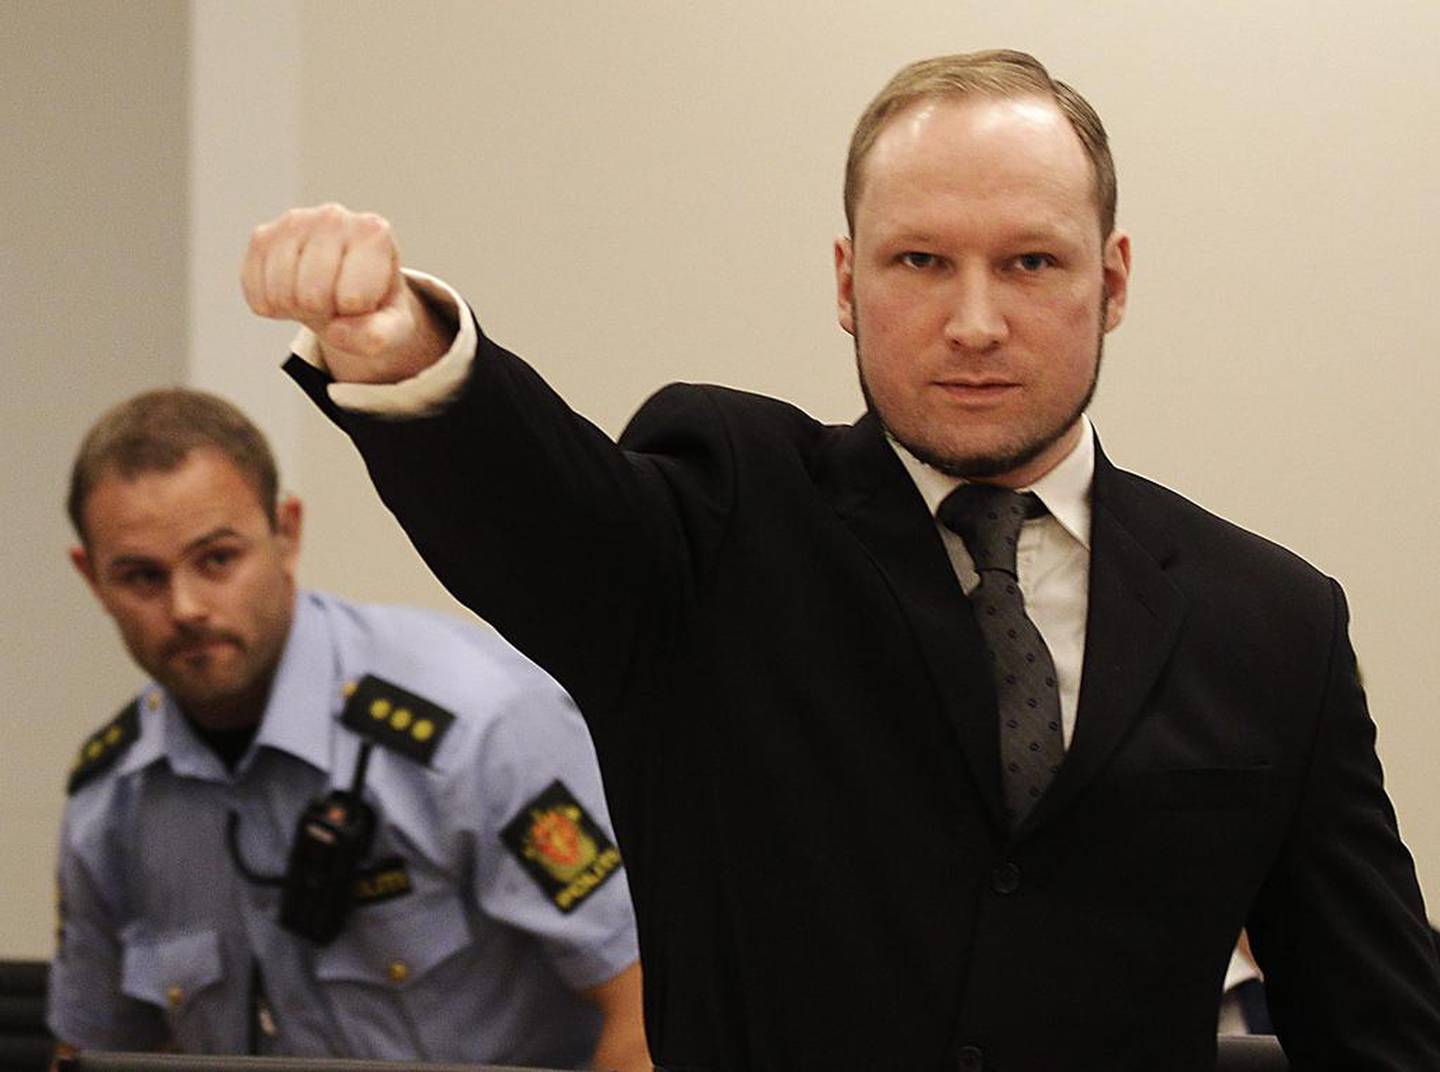 Far-right terrorist Anders Behring Breivik makes a salute in an Oslo courtroom after the 2011 atrocity. AP